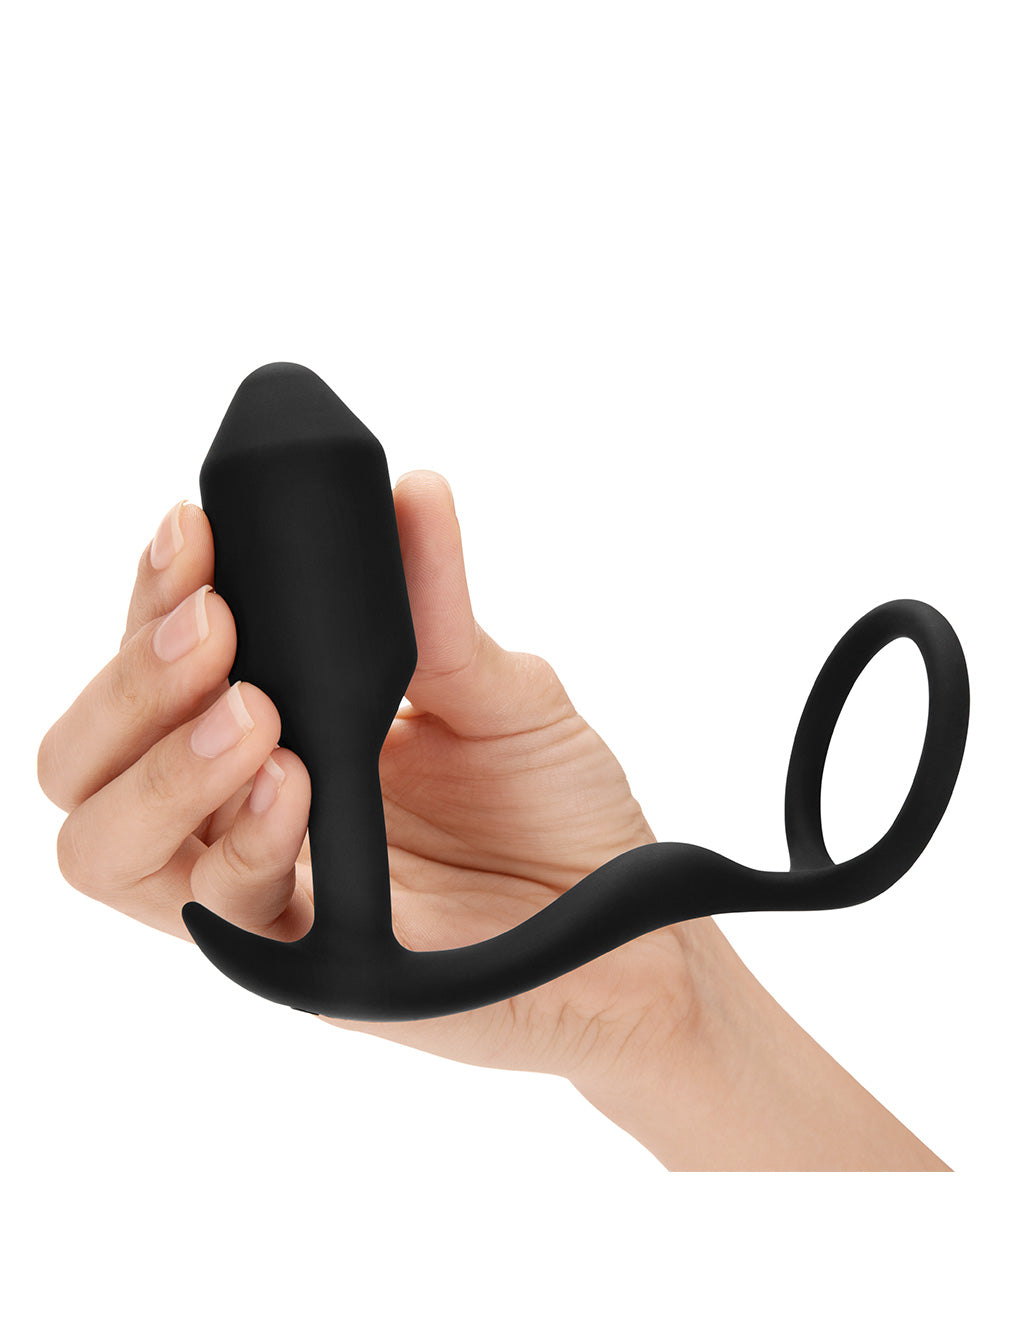 B-Vibe Snug & Tug Weighted Silicone Anal Plug and Cock Ring- In hand 